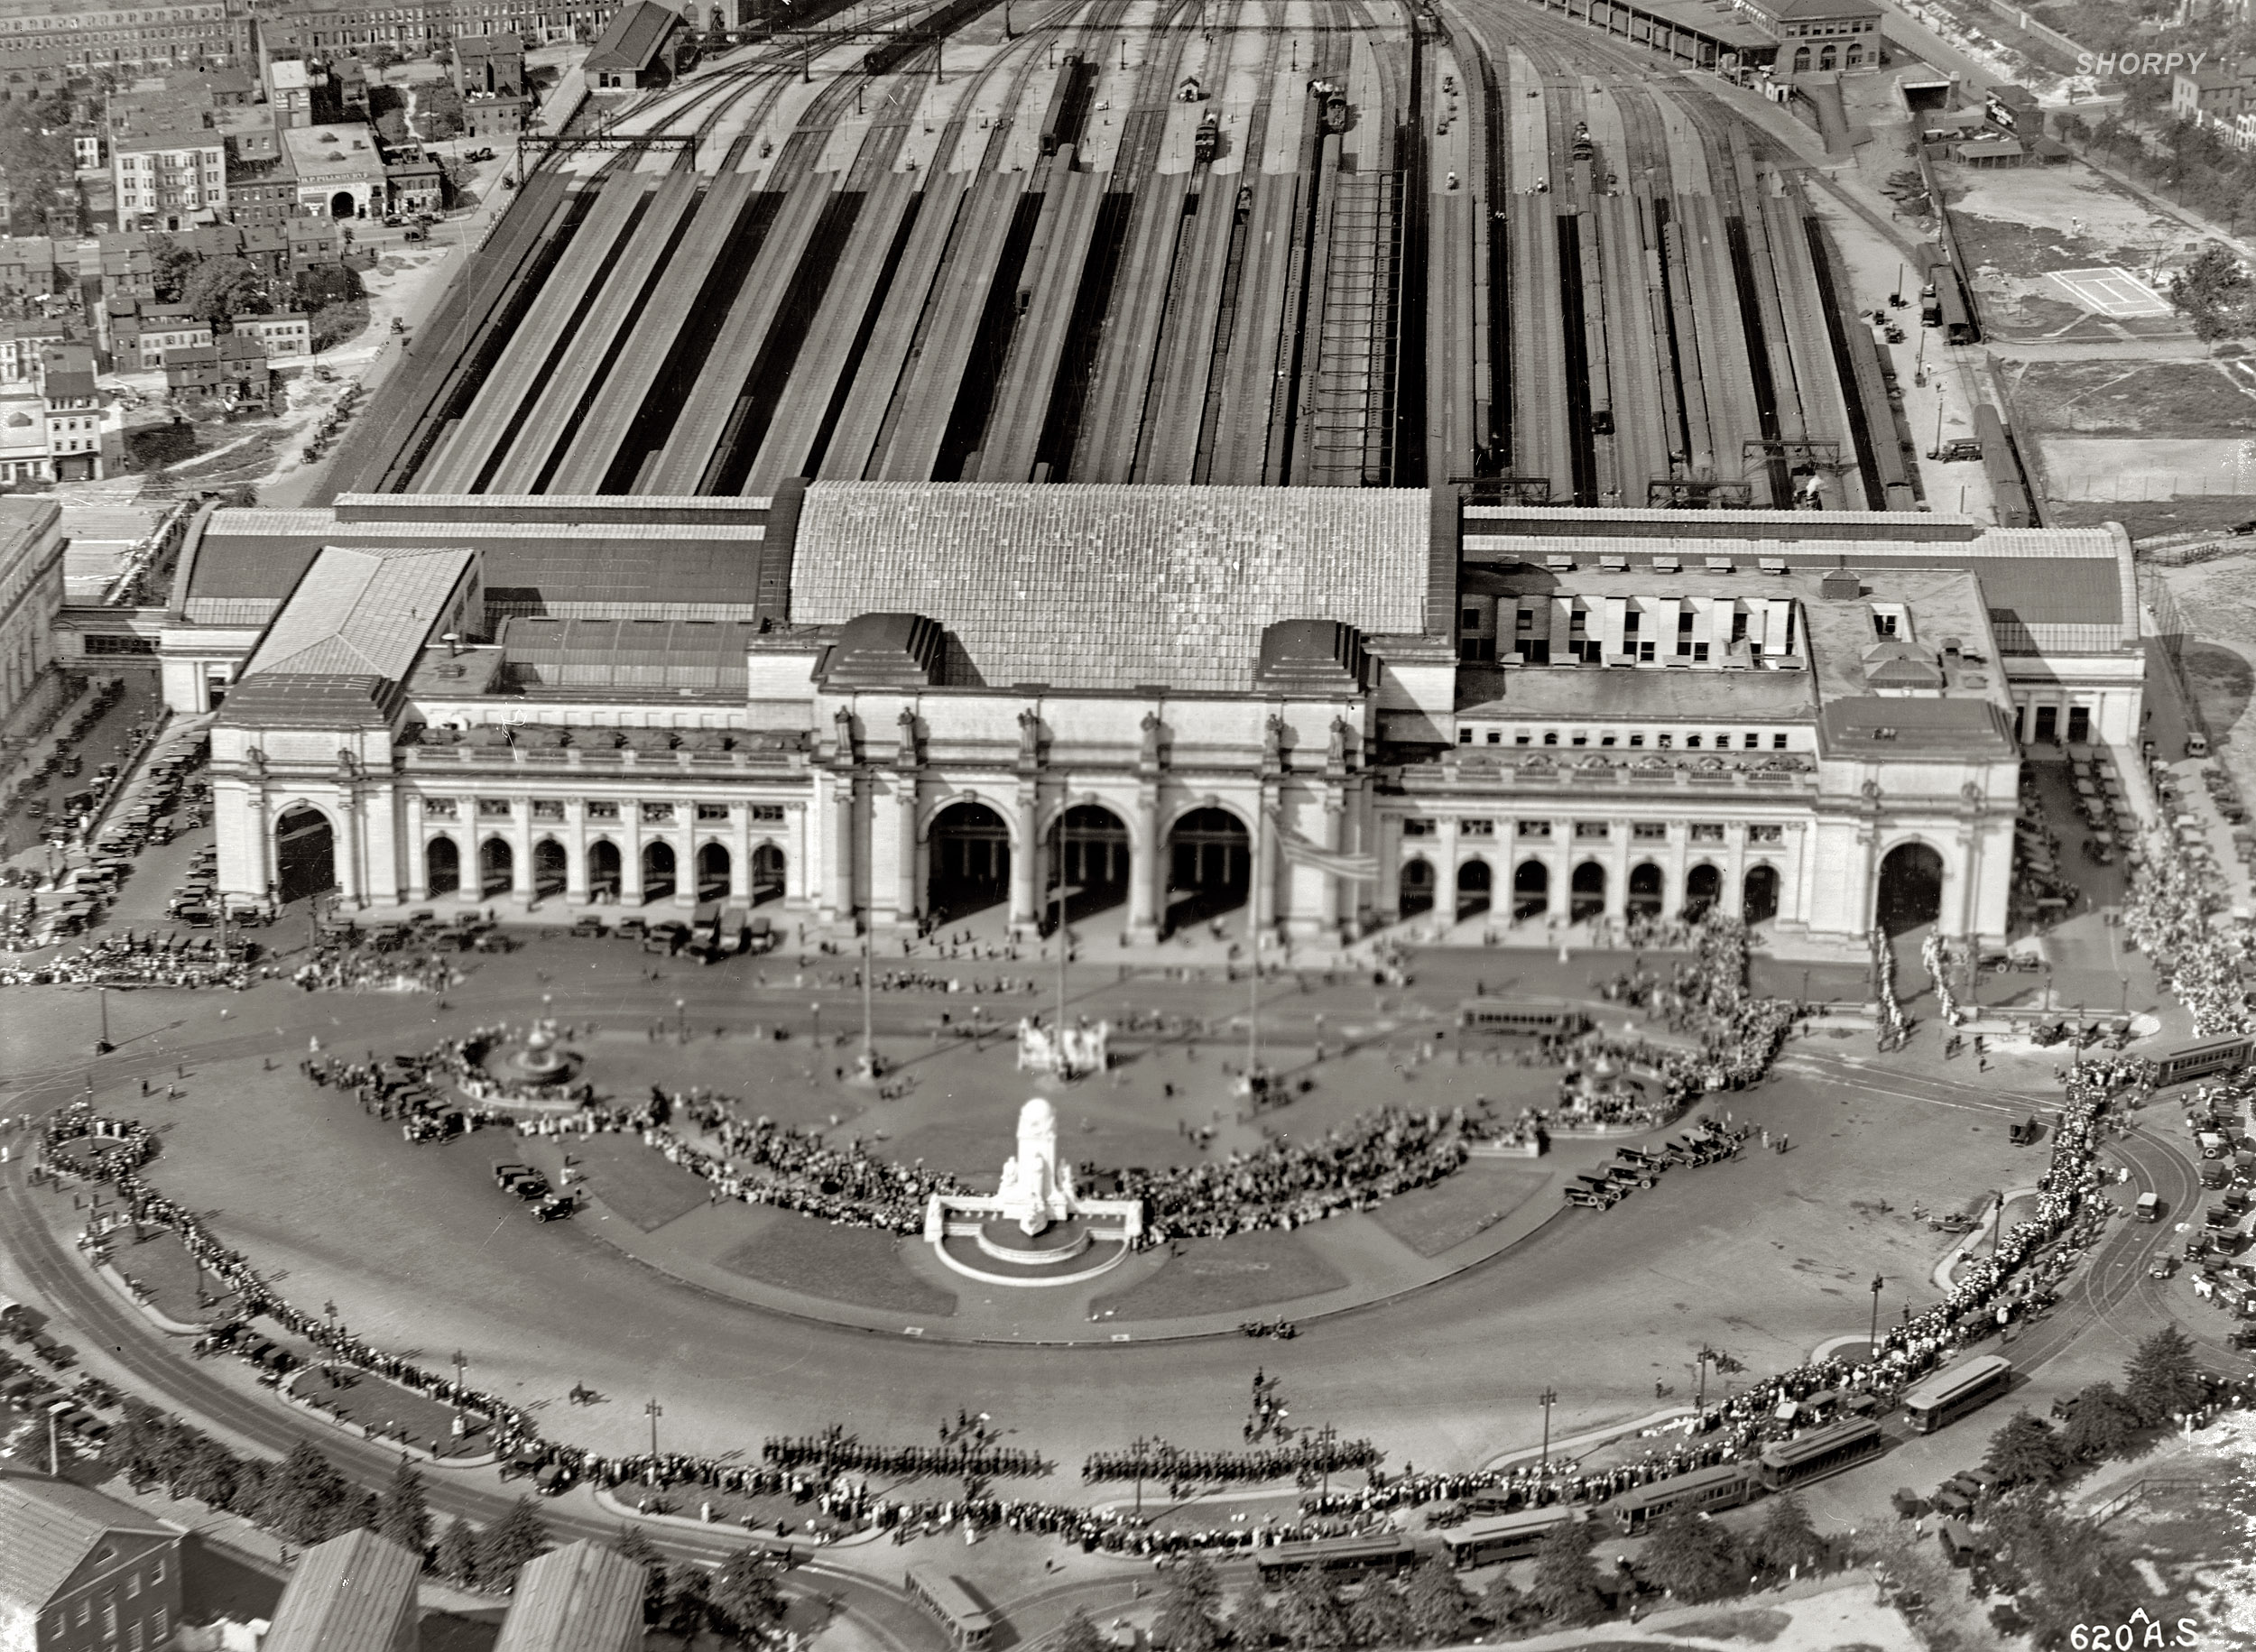 Washington, D.C., circa 1919. "Union Station from air." Something special seems to be happening down there. National Photo Co. Collection. View full size.